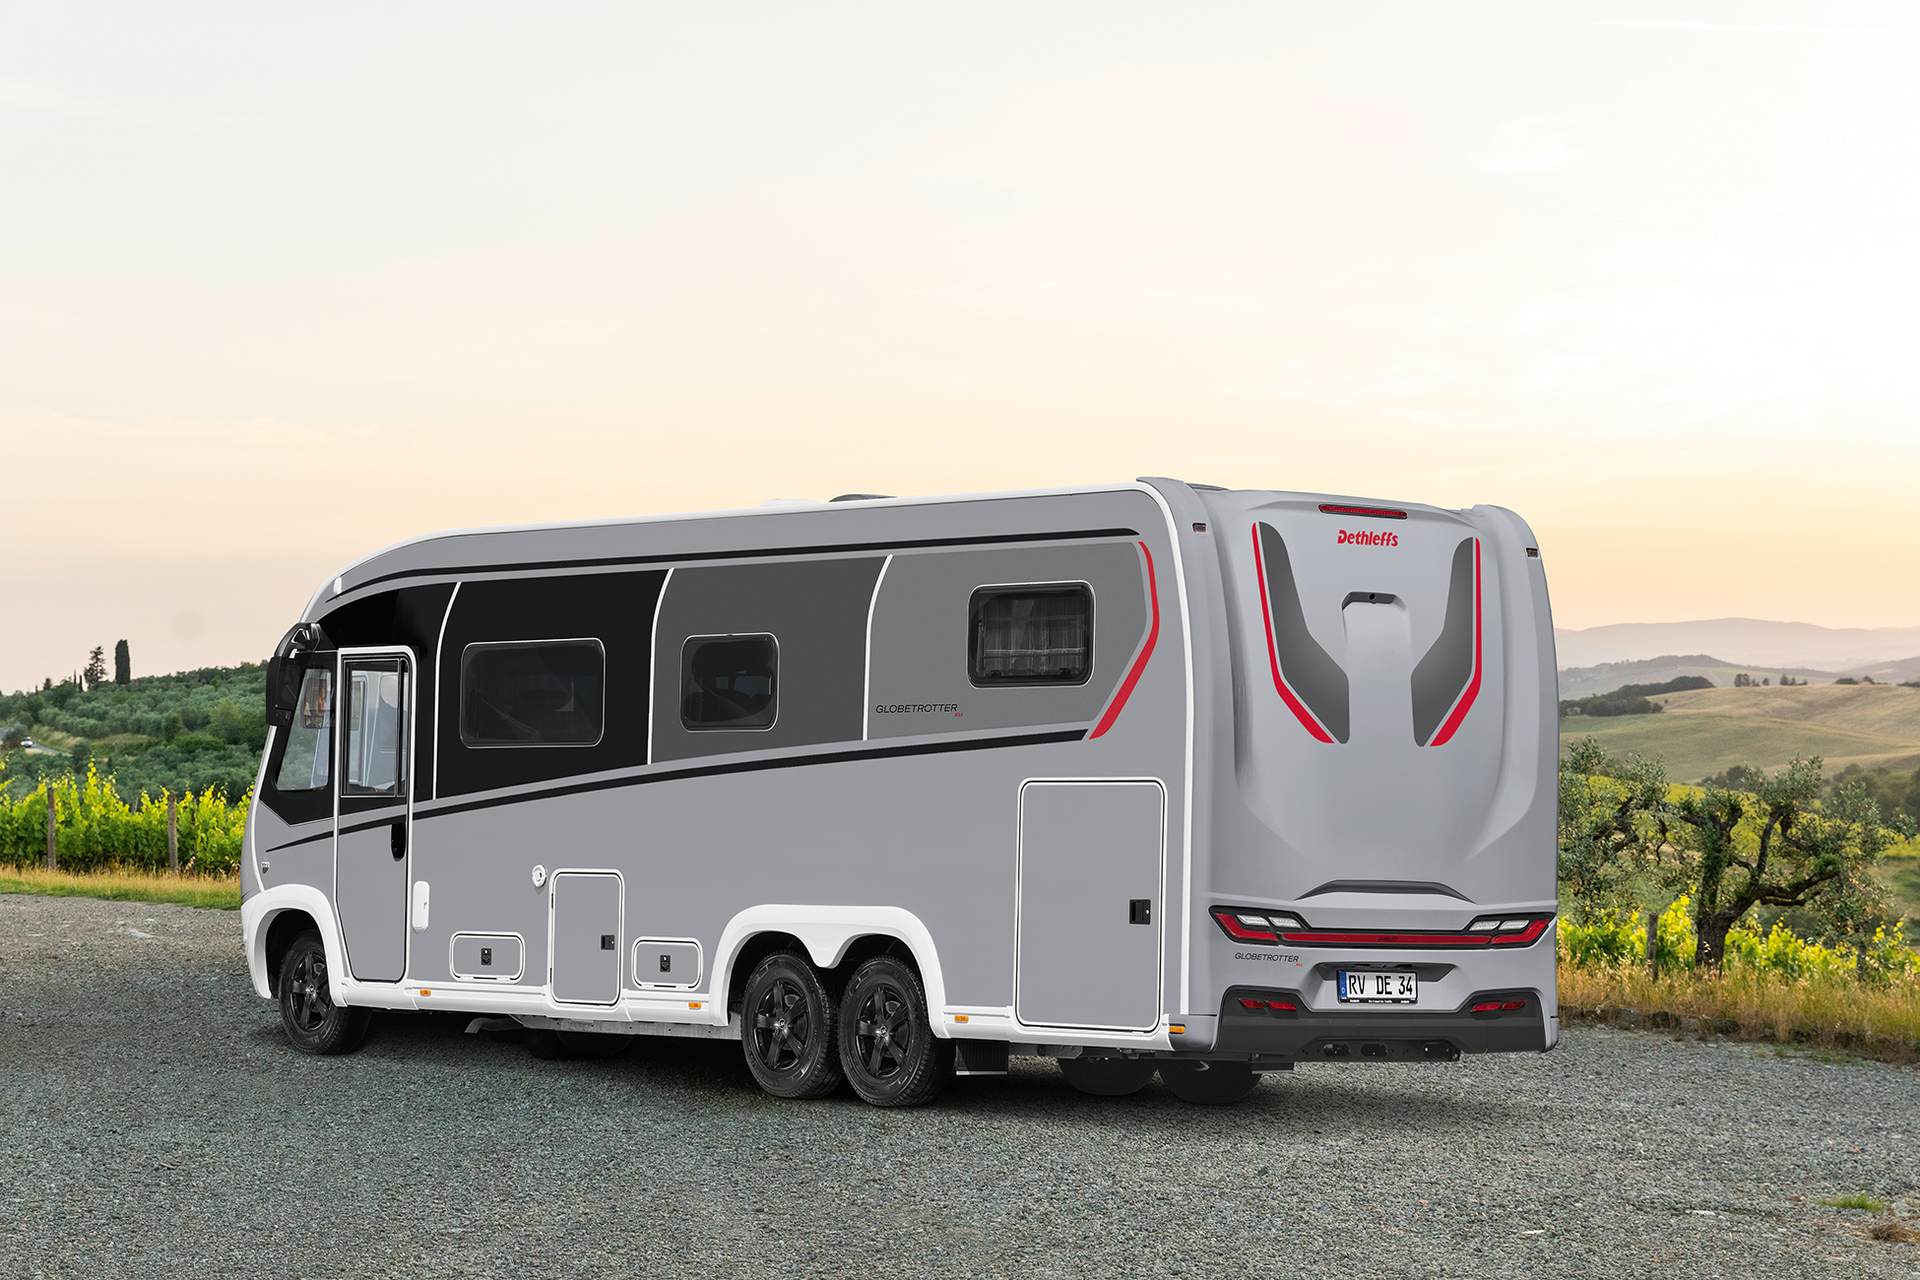 Stylish GRP rear section with first-class insulation and elegantly integrated reversing camera and third brake light